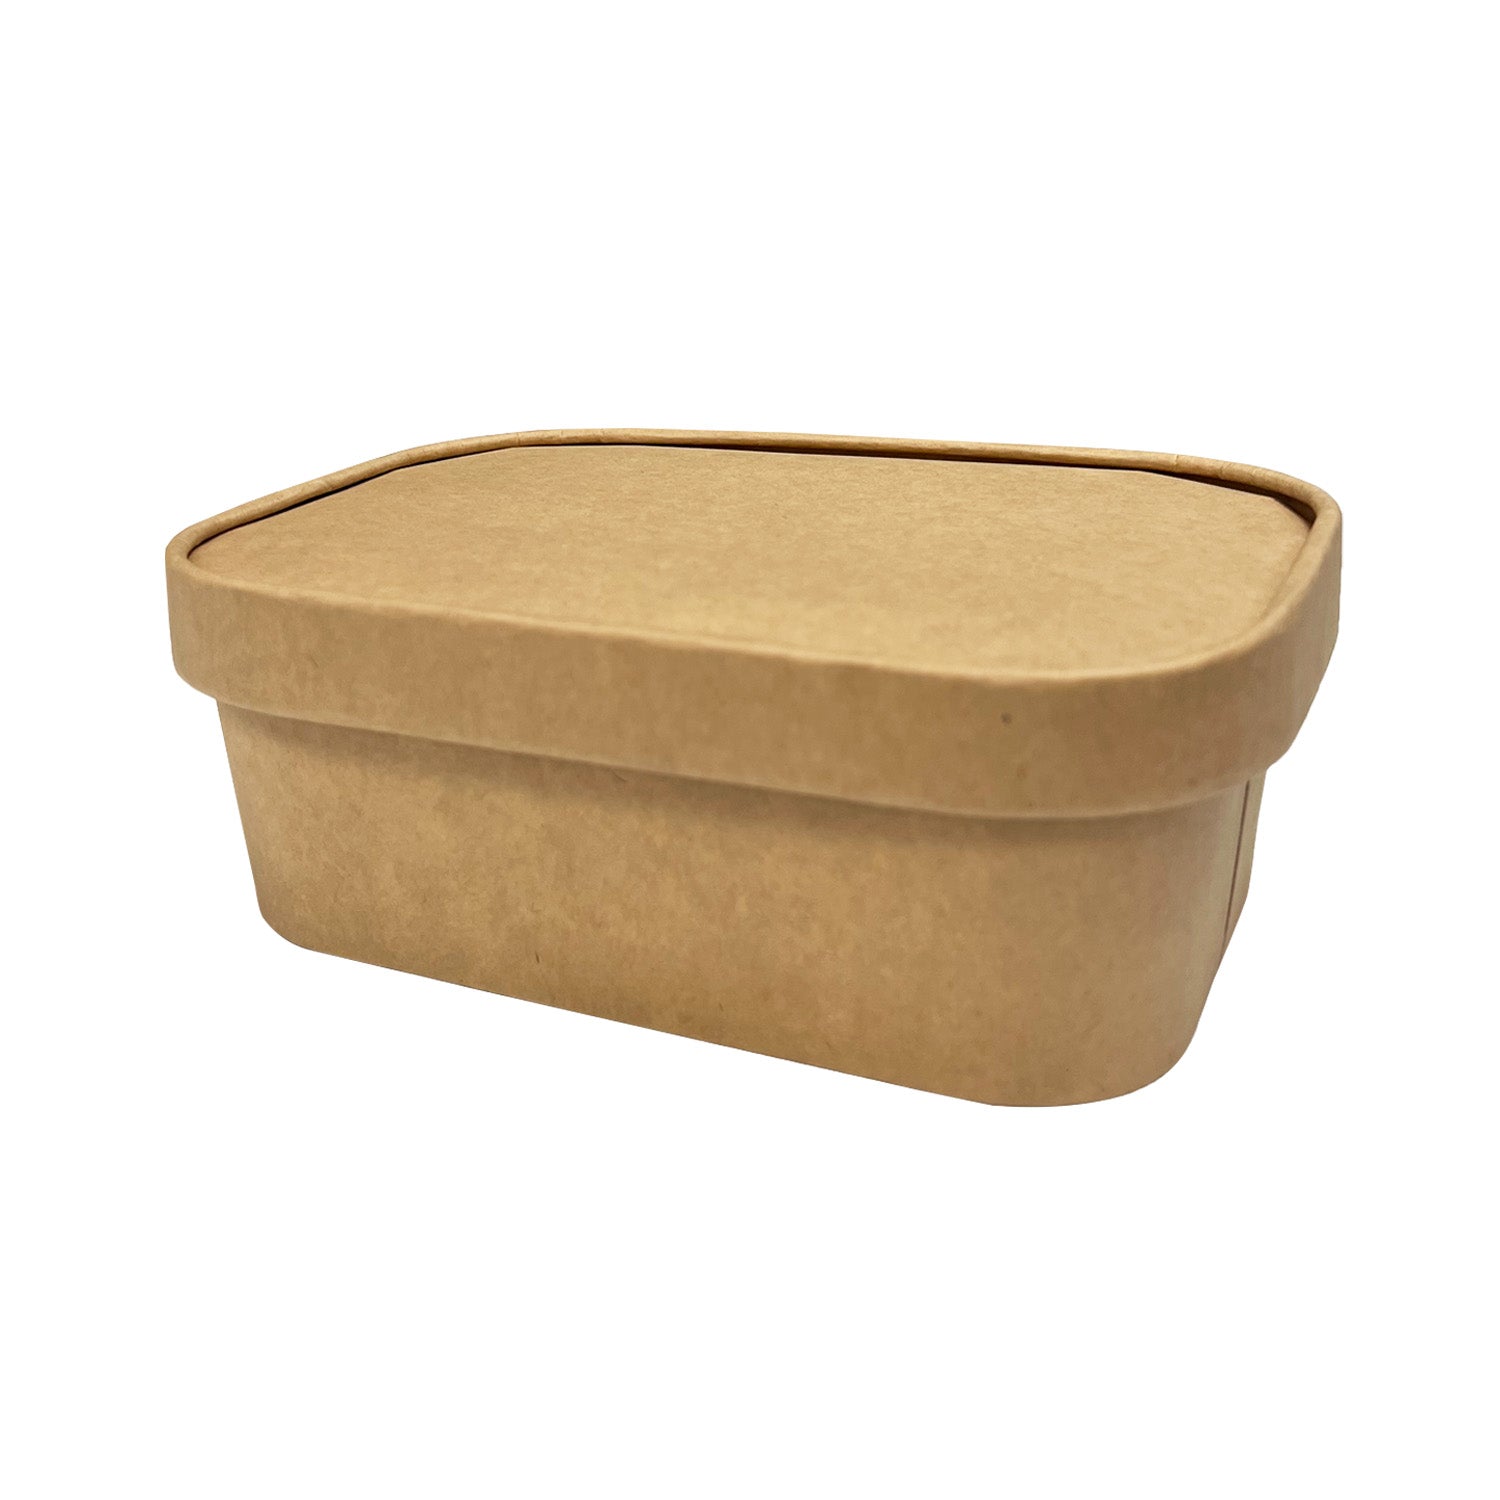 50 Sets/300 Sets, 34oz, 1000ml, Kraft Paper Rectangle Containers, with Paper Lids